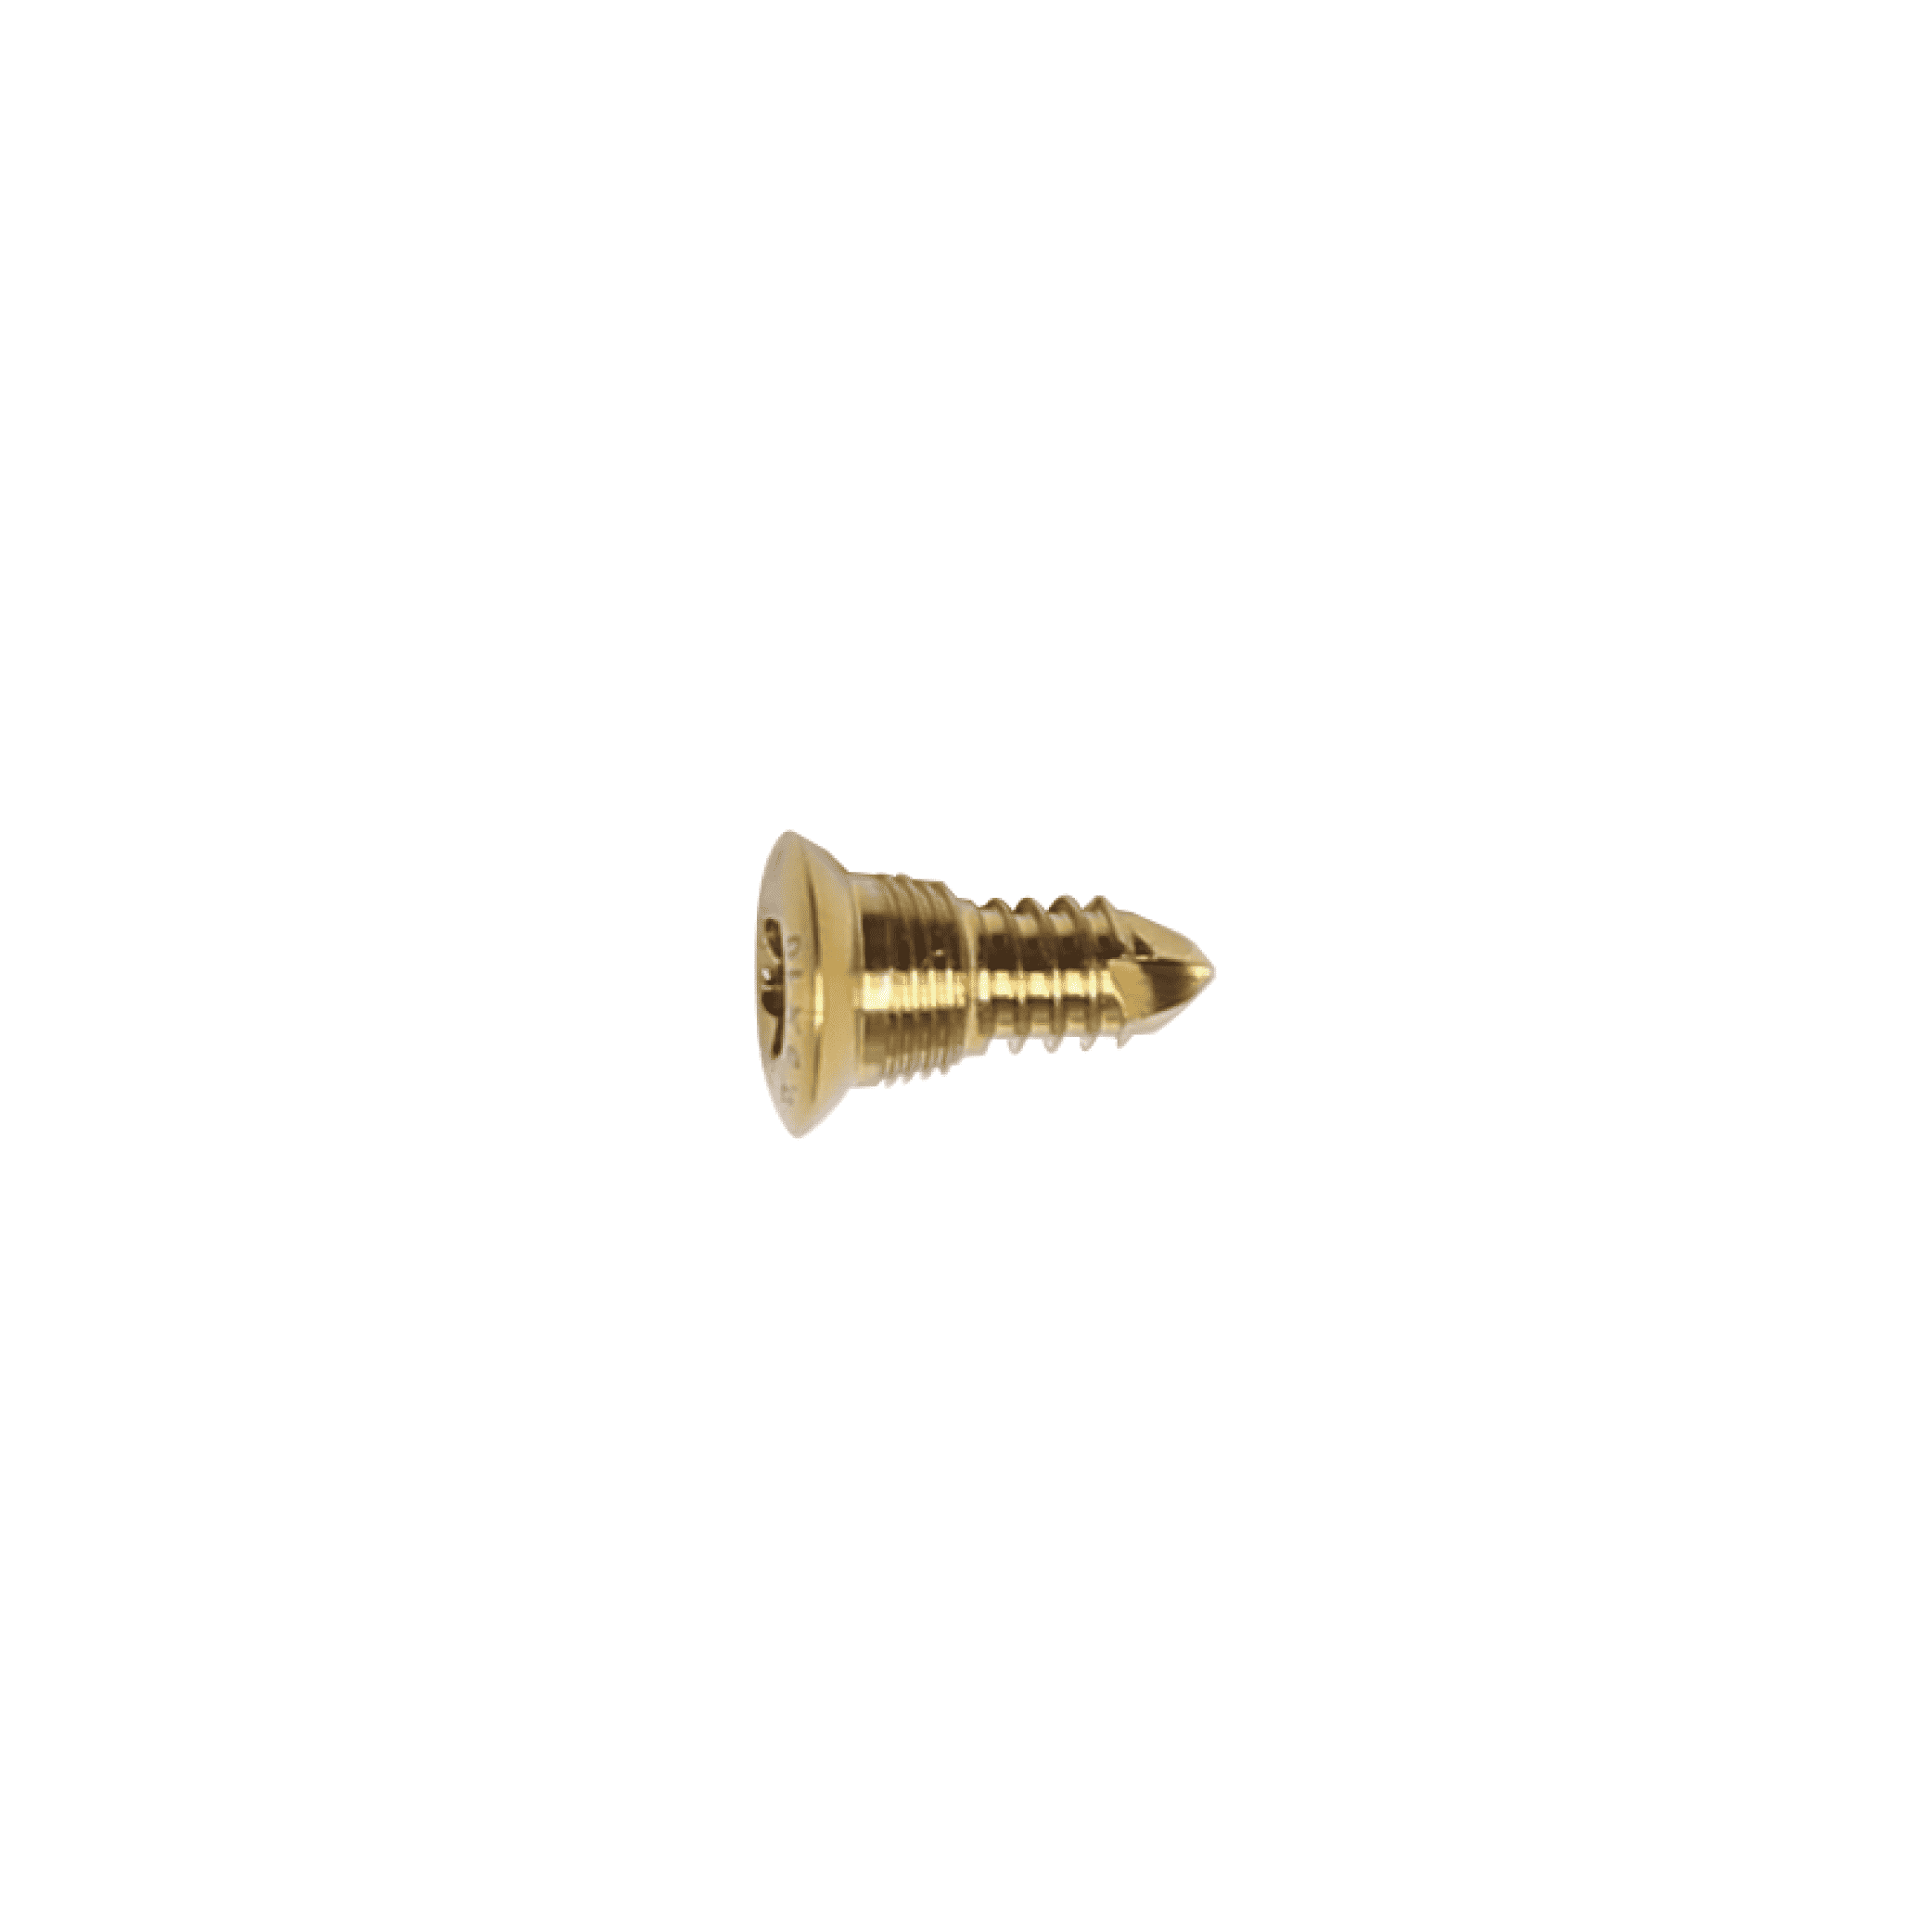 Locking Connecting Screw (Anodized)